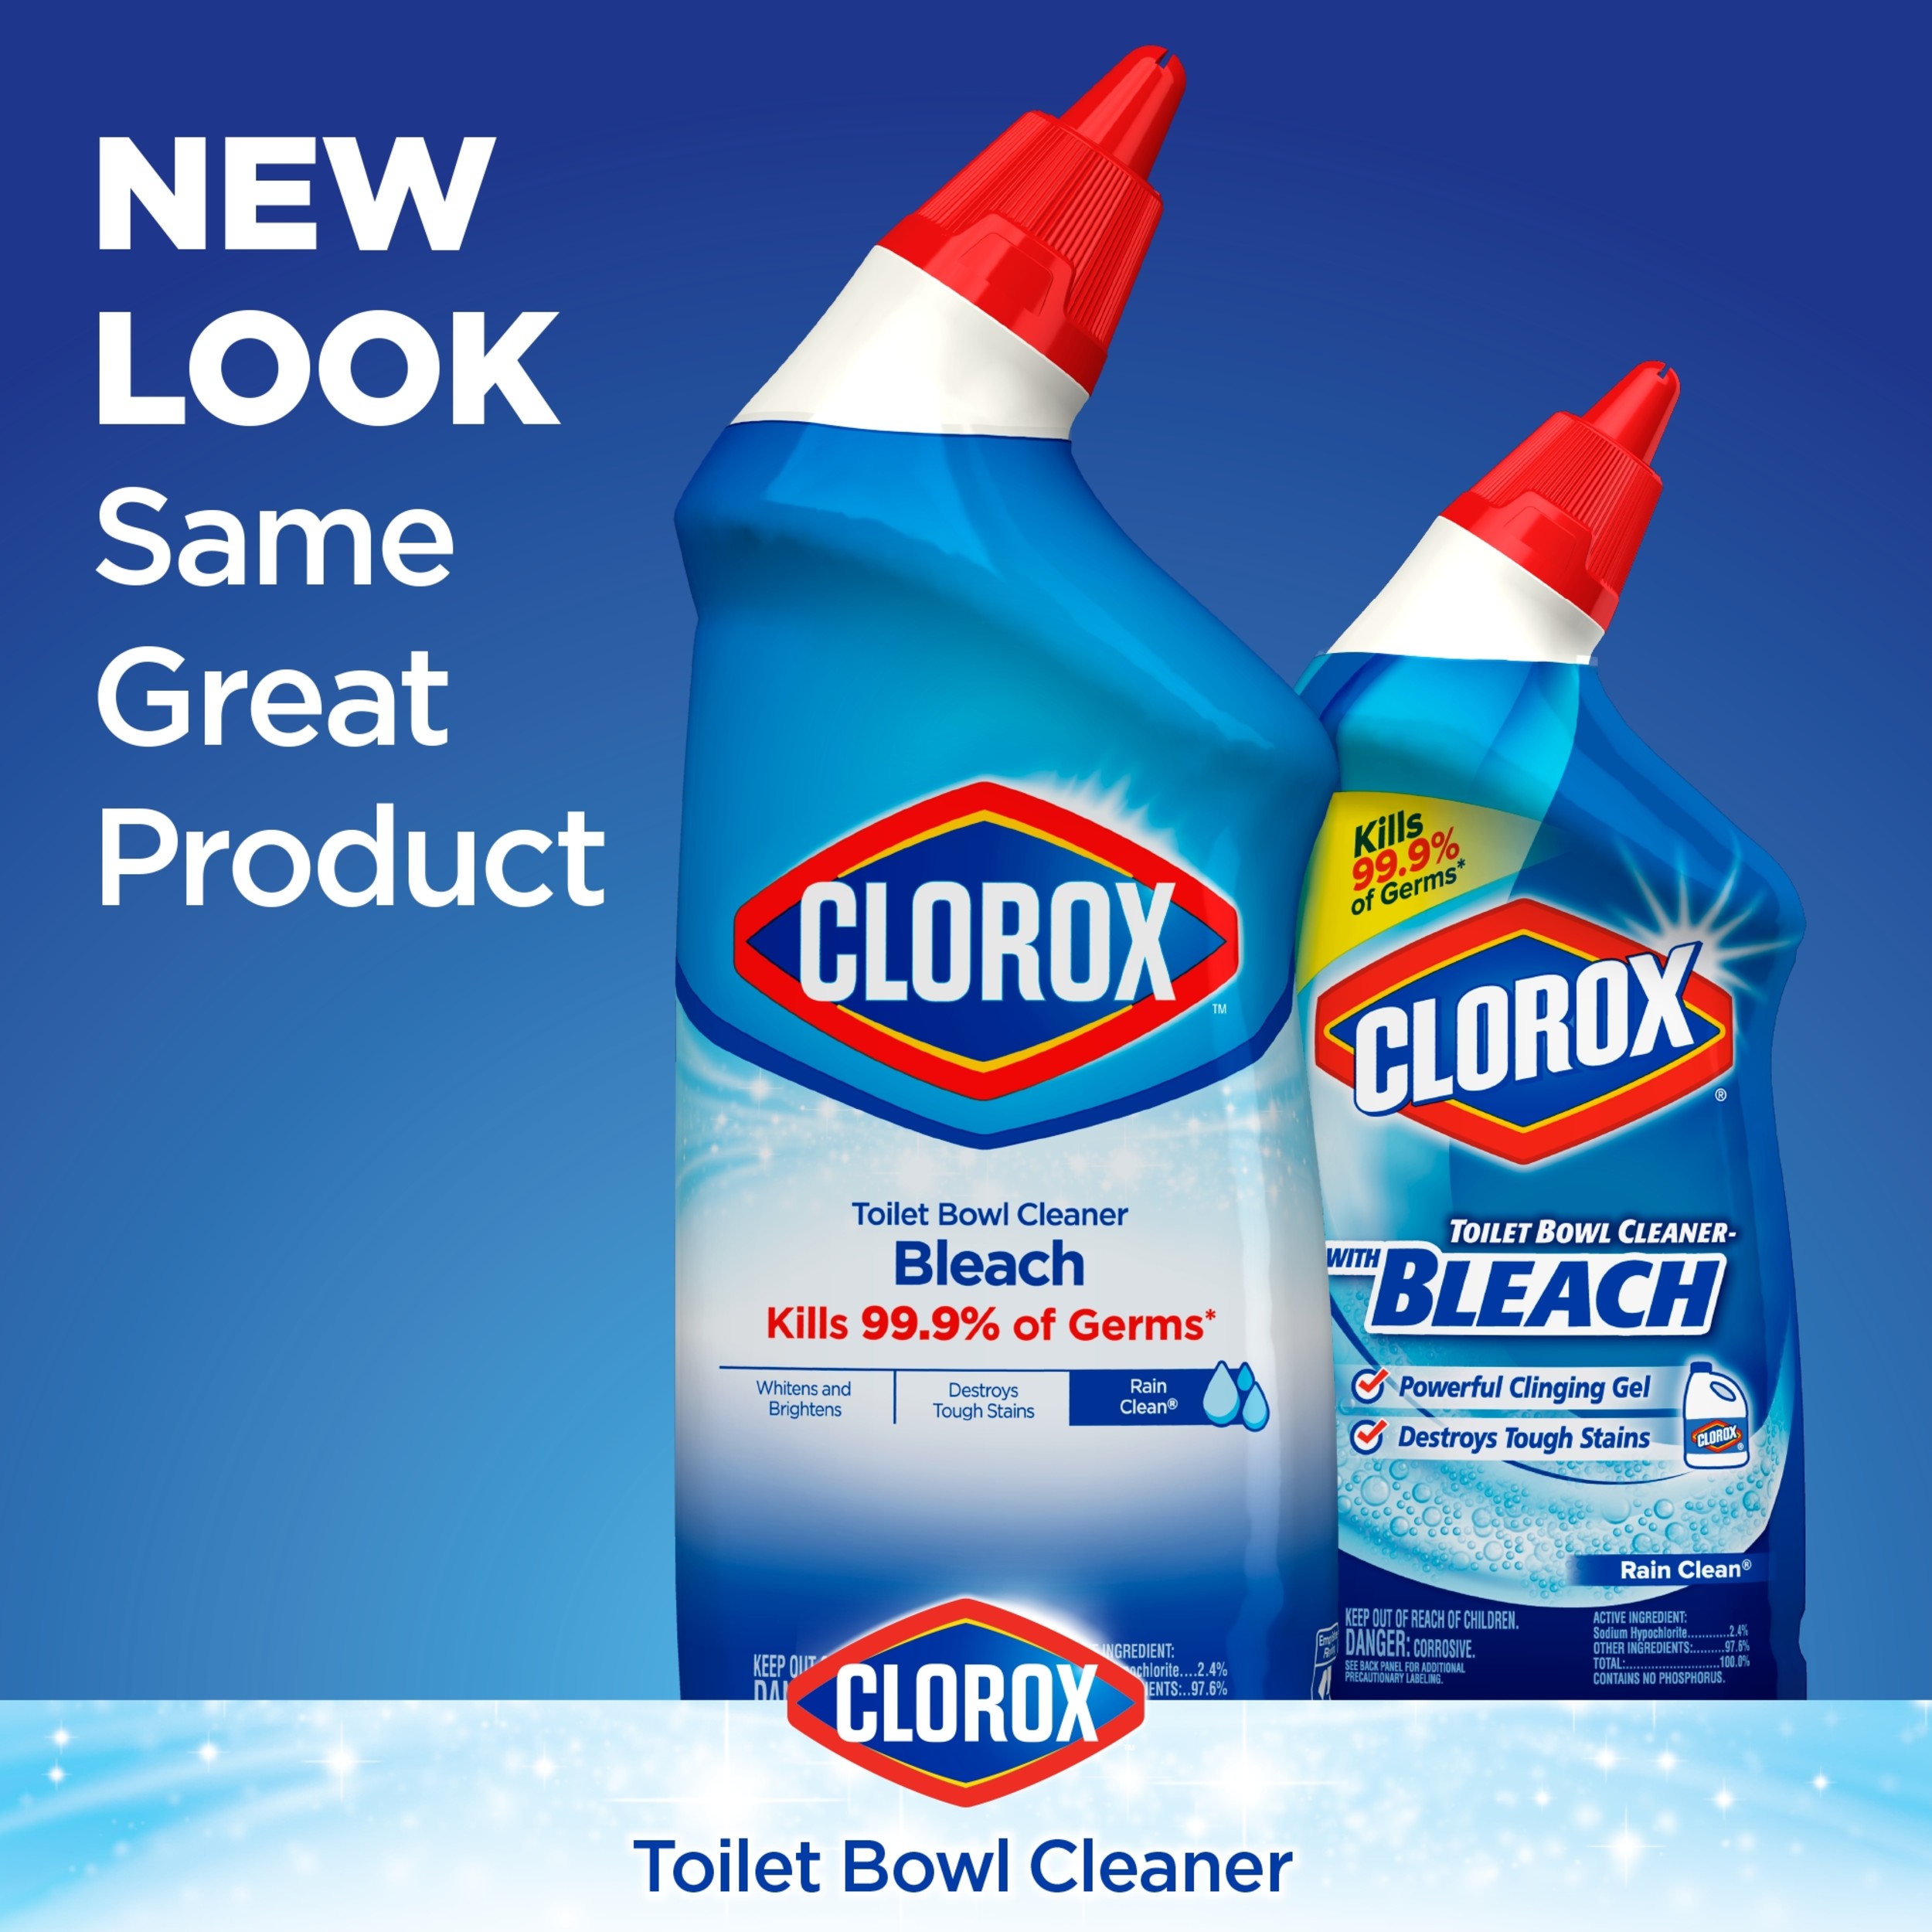 Clorox Toilet Bowl Cleaner with Bleach, Rain Clean - 24 Ounces, 3 Pack - image 3 of 19